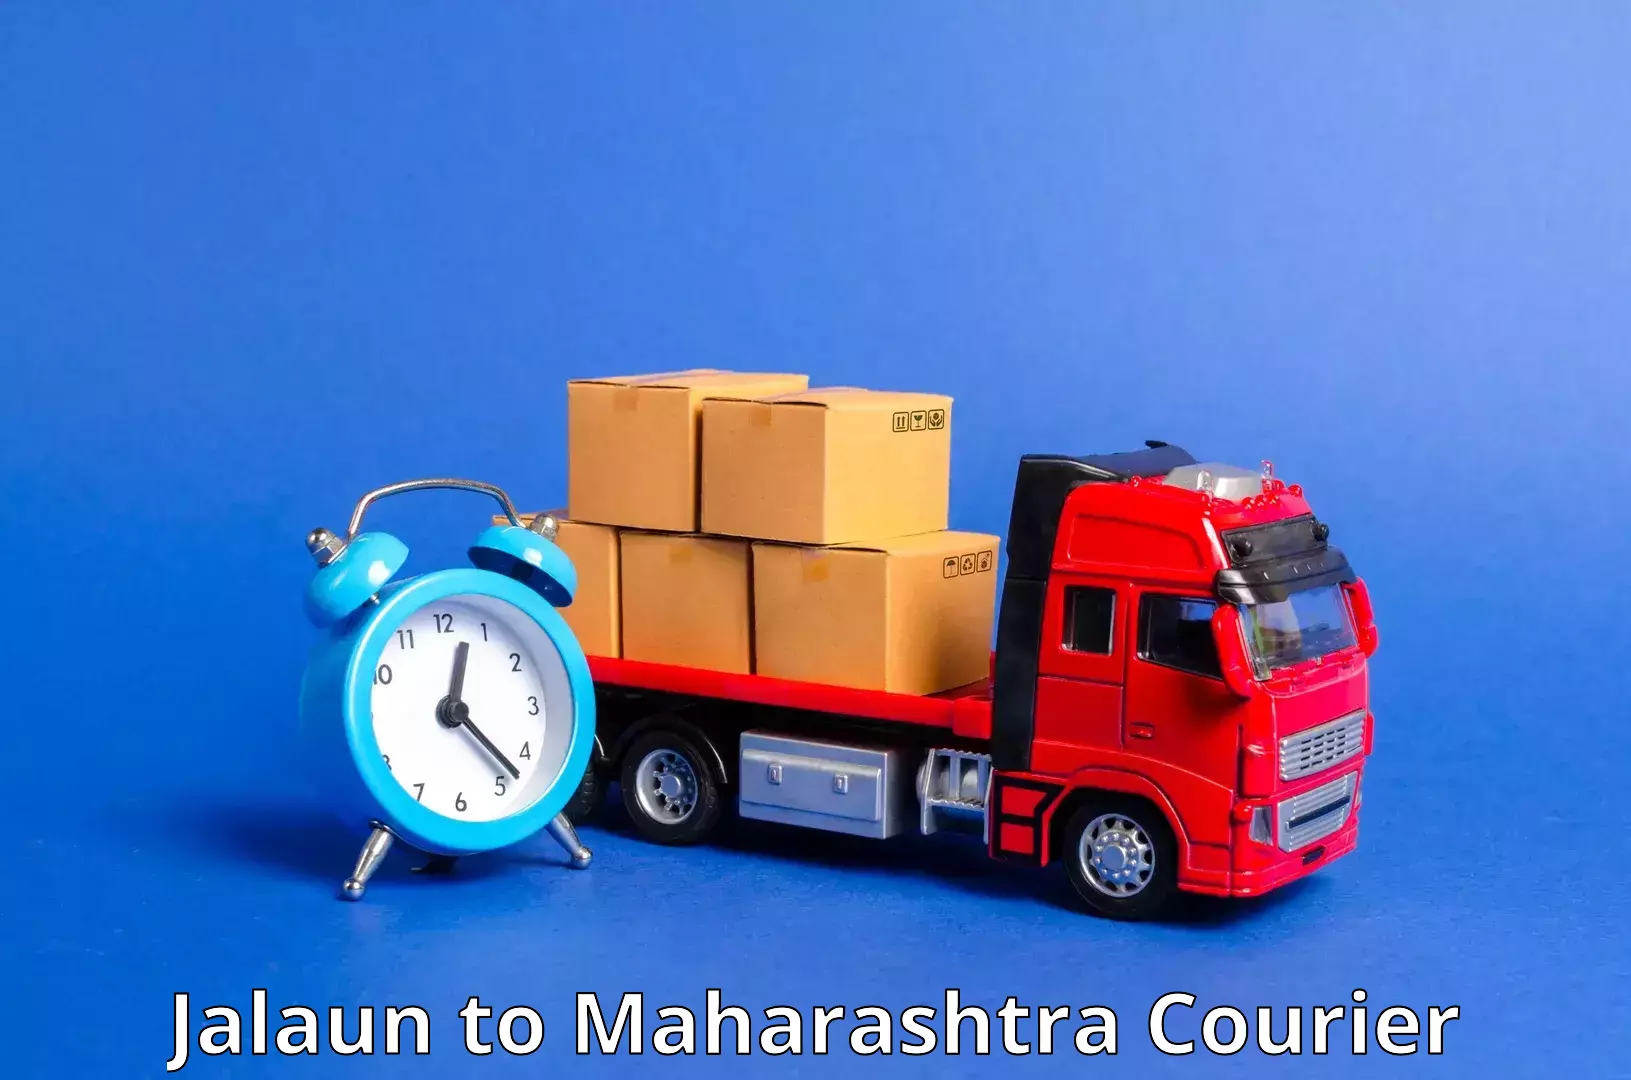 Multi-national courier services Jalaun to Dharmabad